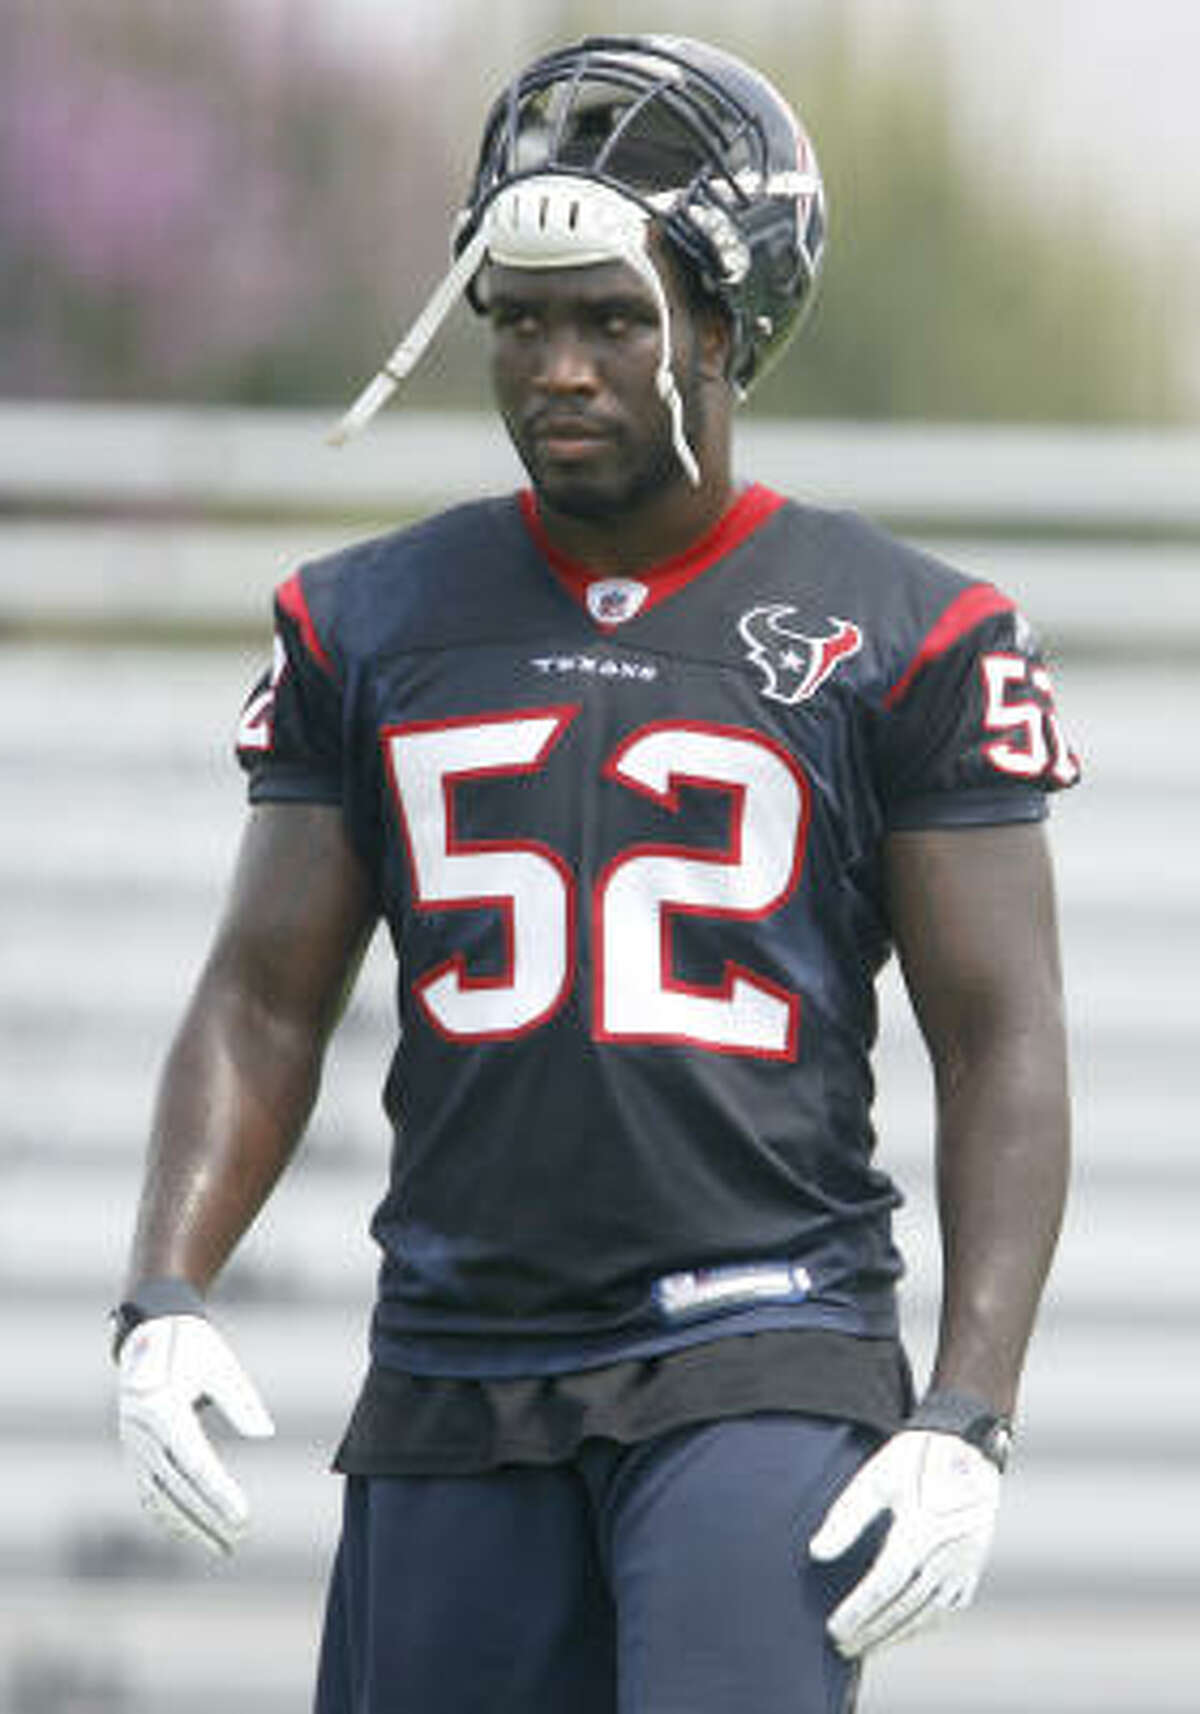 2. Who will start the first four games at strong-side linebacker while Brian Cushing serves his suspension? Xavier Adibi (above) was a reserve on the weak side during his first two seasons. Now he’s moved to the strong side and goes to camp as the most likely candidate to replace Cushing, the NFL Defensive Player of the year who was suspended for violating the league’s policy against performance enhancing drugs. Adibi (6-foot-2, 242 pounds) has excellent speed and covers a lot of ground, but he lacks the strong-side mentality and intensity that Cushing brings. Danny Clark, who started 12 games for the Giants last season, is an experienced veteran who got a late start because he signed during the offseason program. He’s a natural at the position, but he’s got to overtake Adibi.